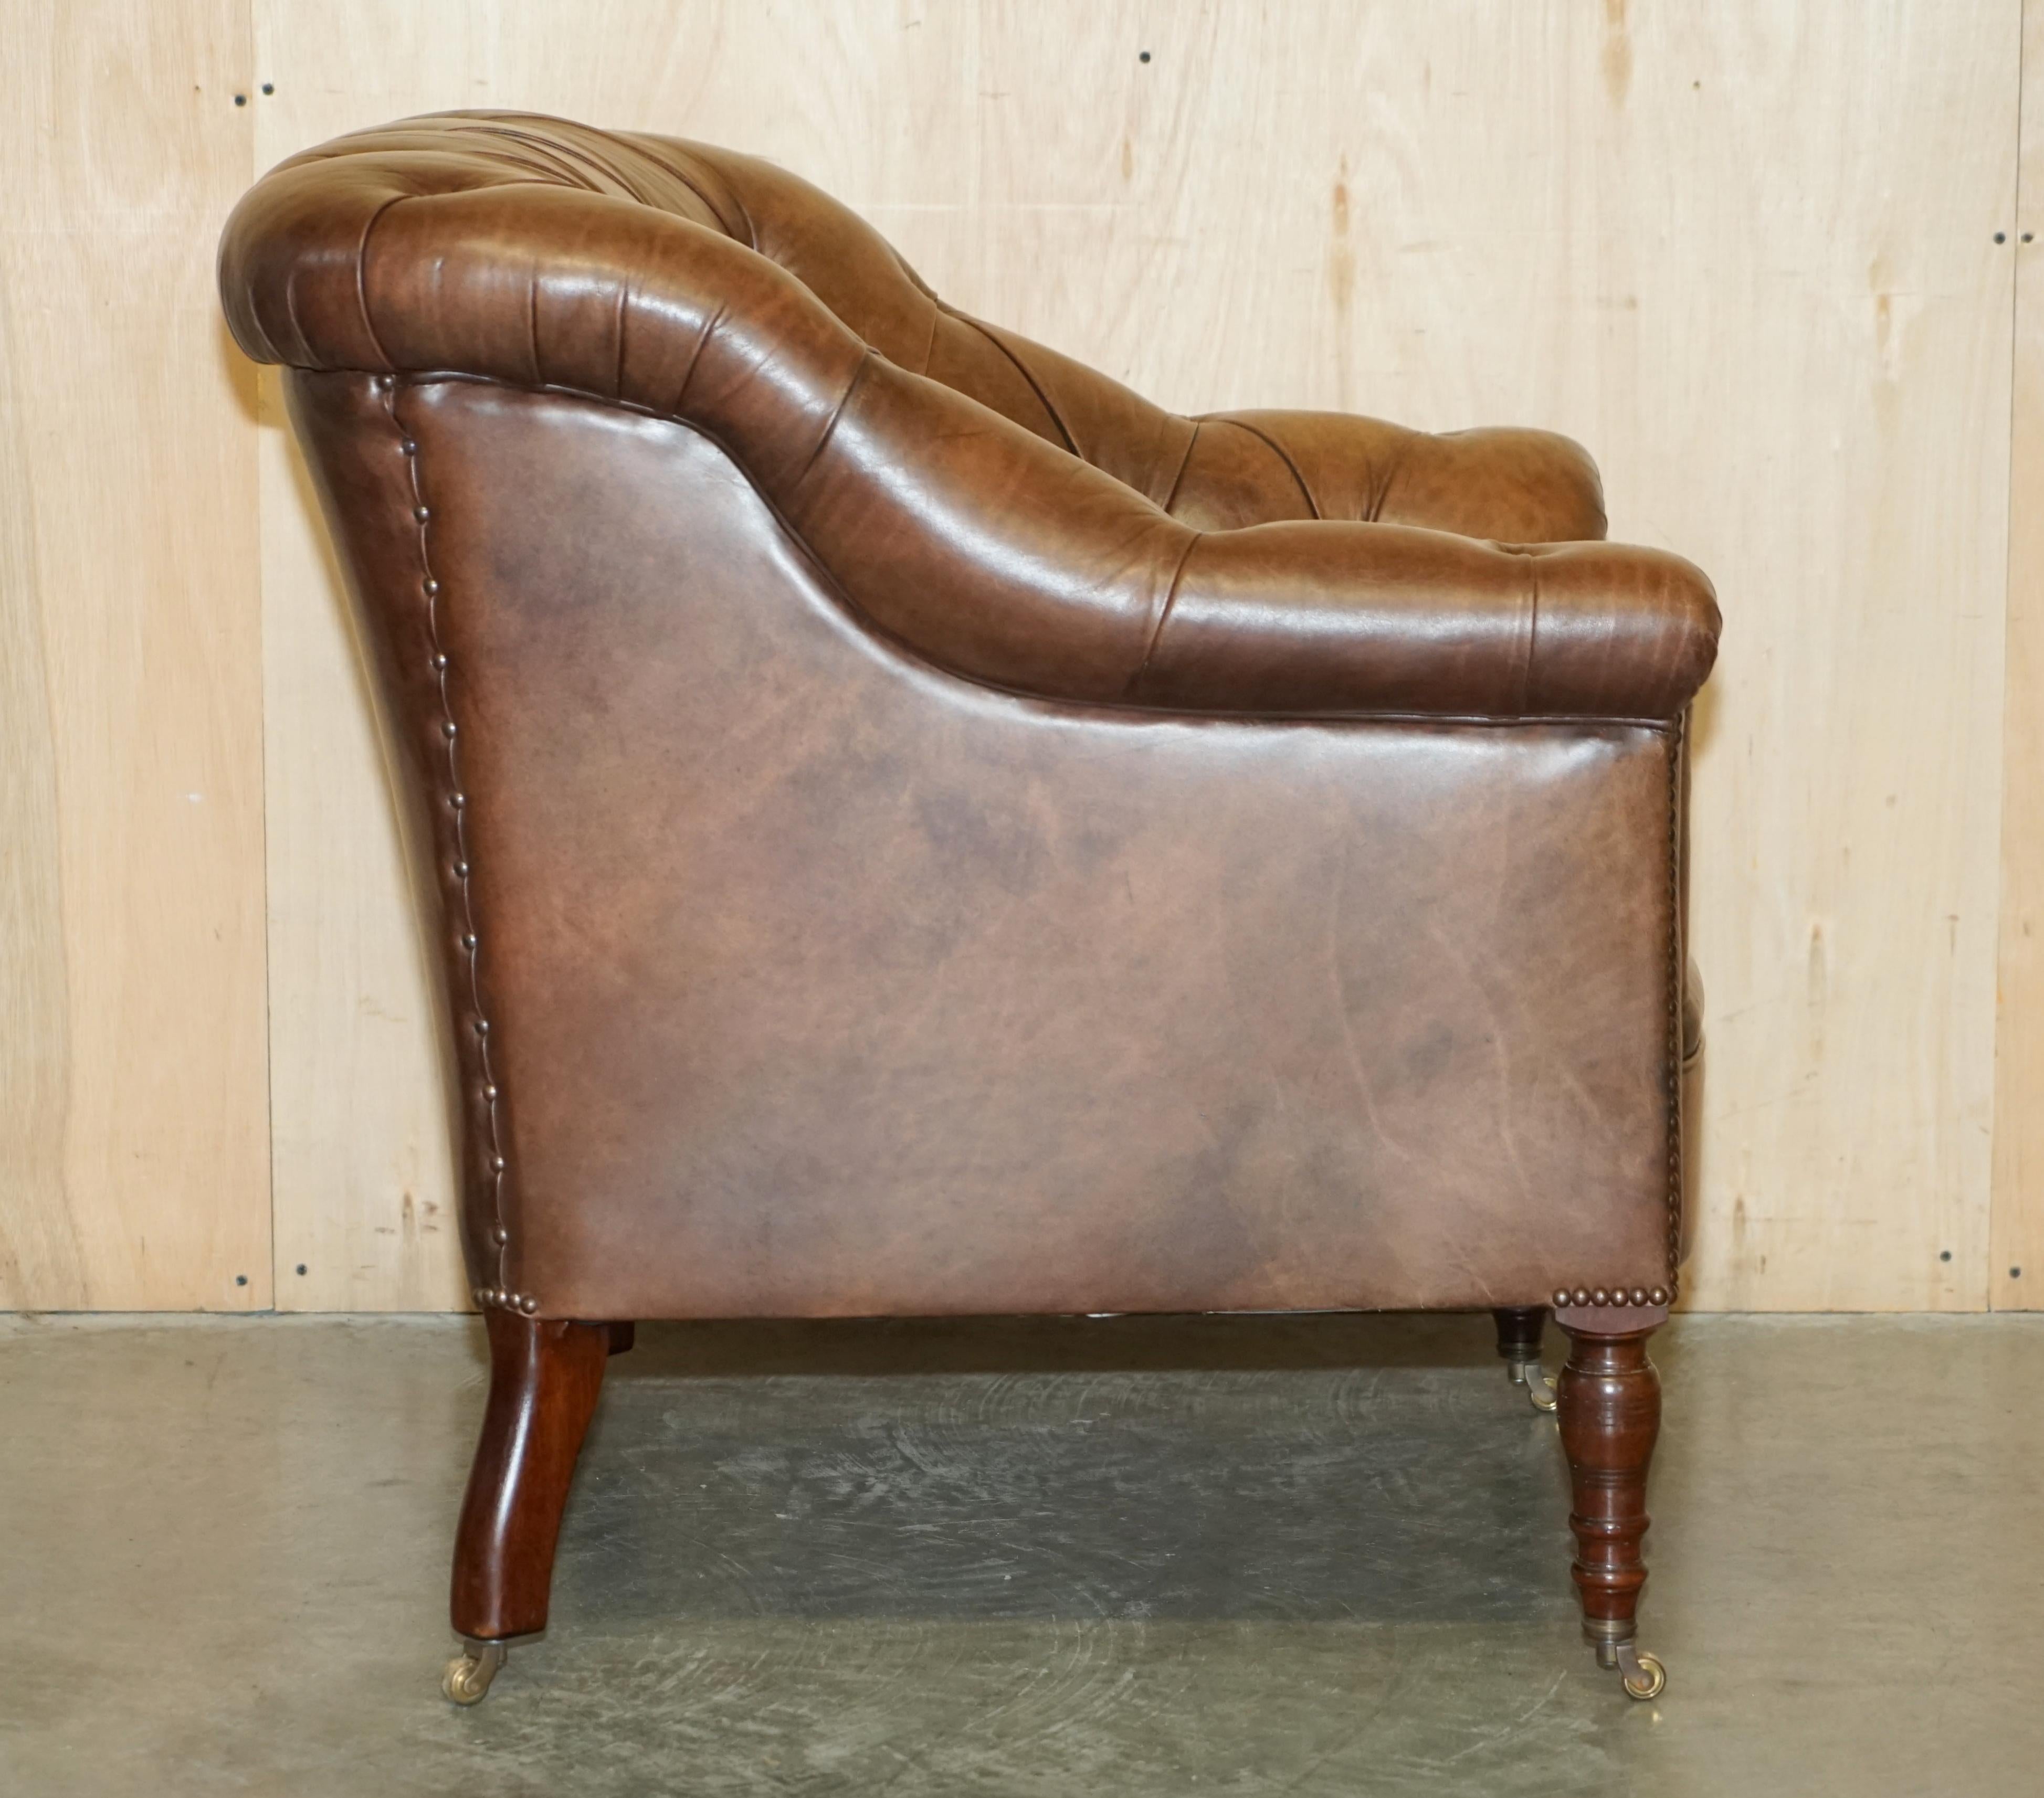  GEORGE SMiTH SOMERVILLE BROWN LEATHER CHESTERFIELD ARMCHAIR 8